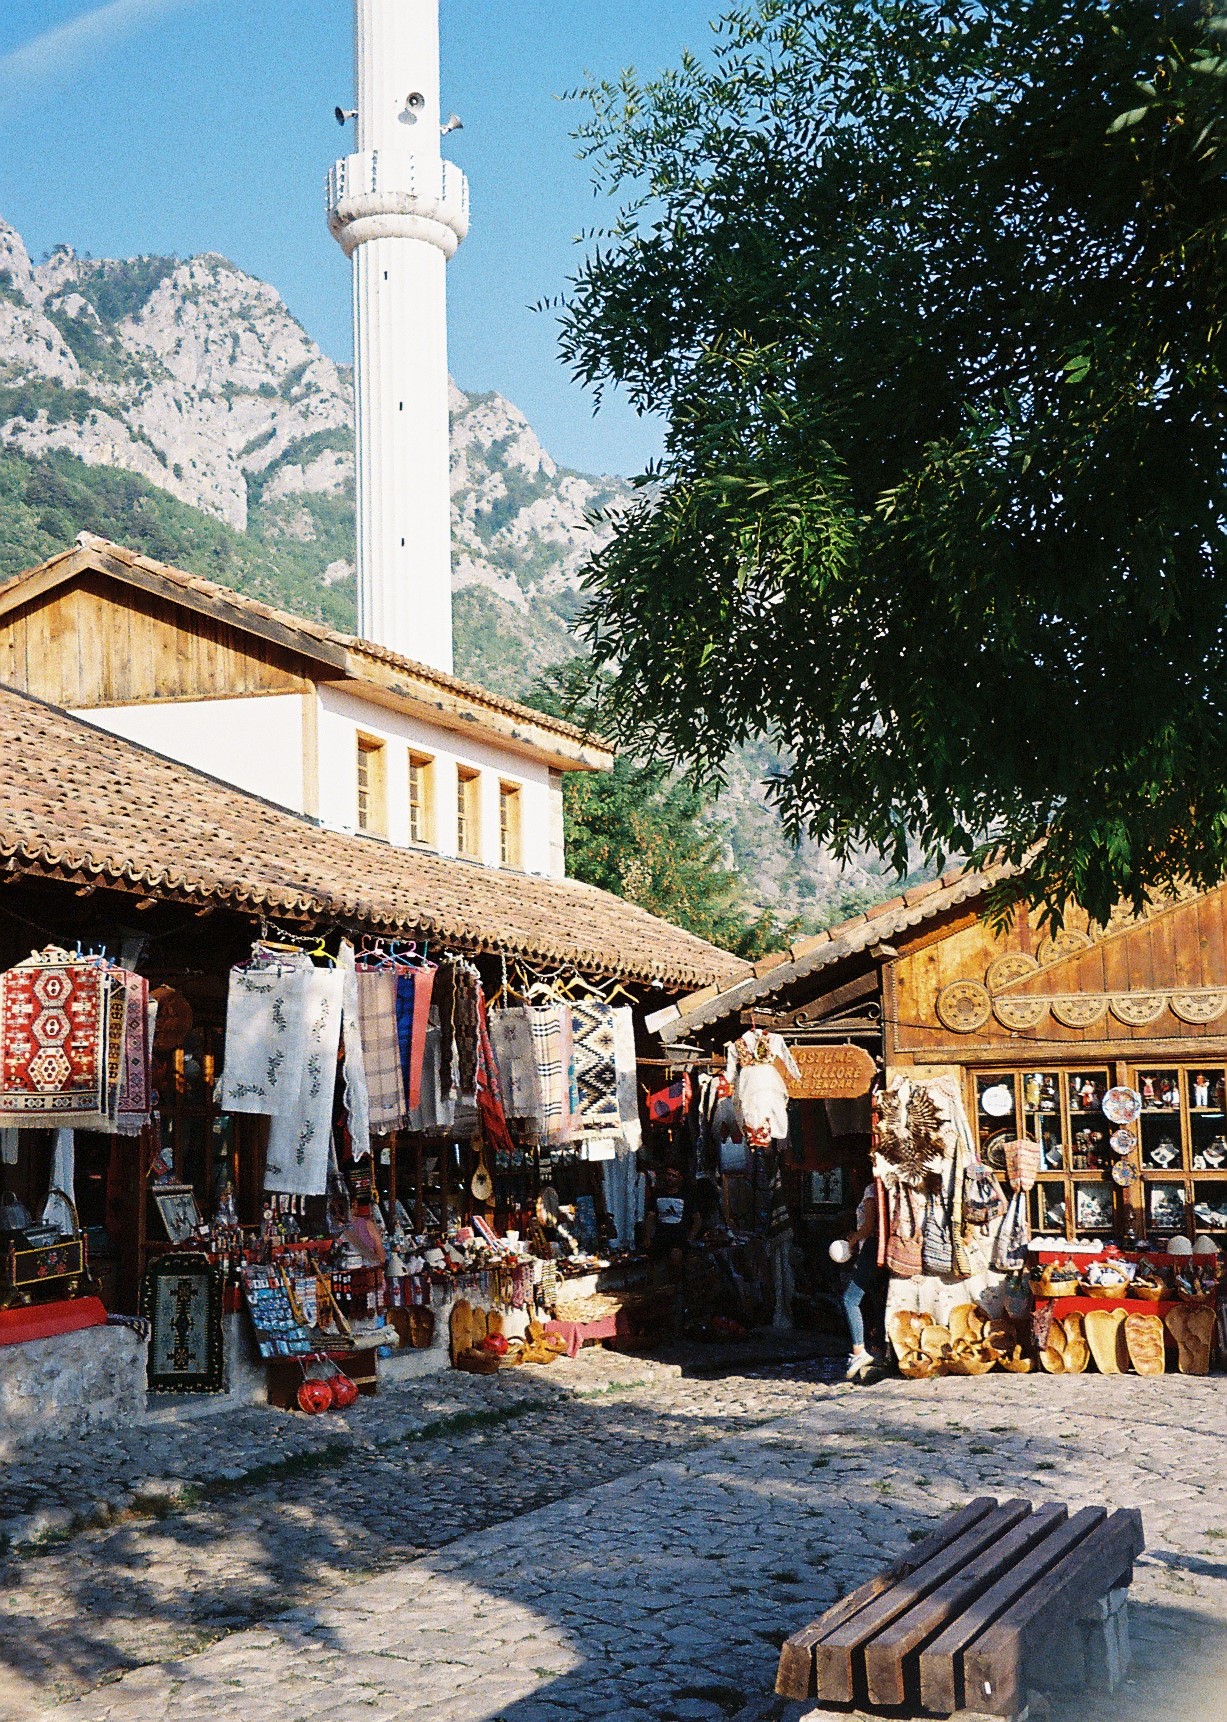 HOLIDAYS IN THE BALKANS